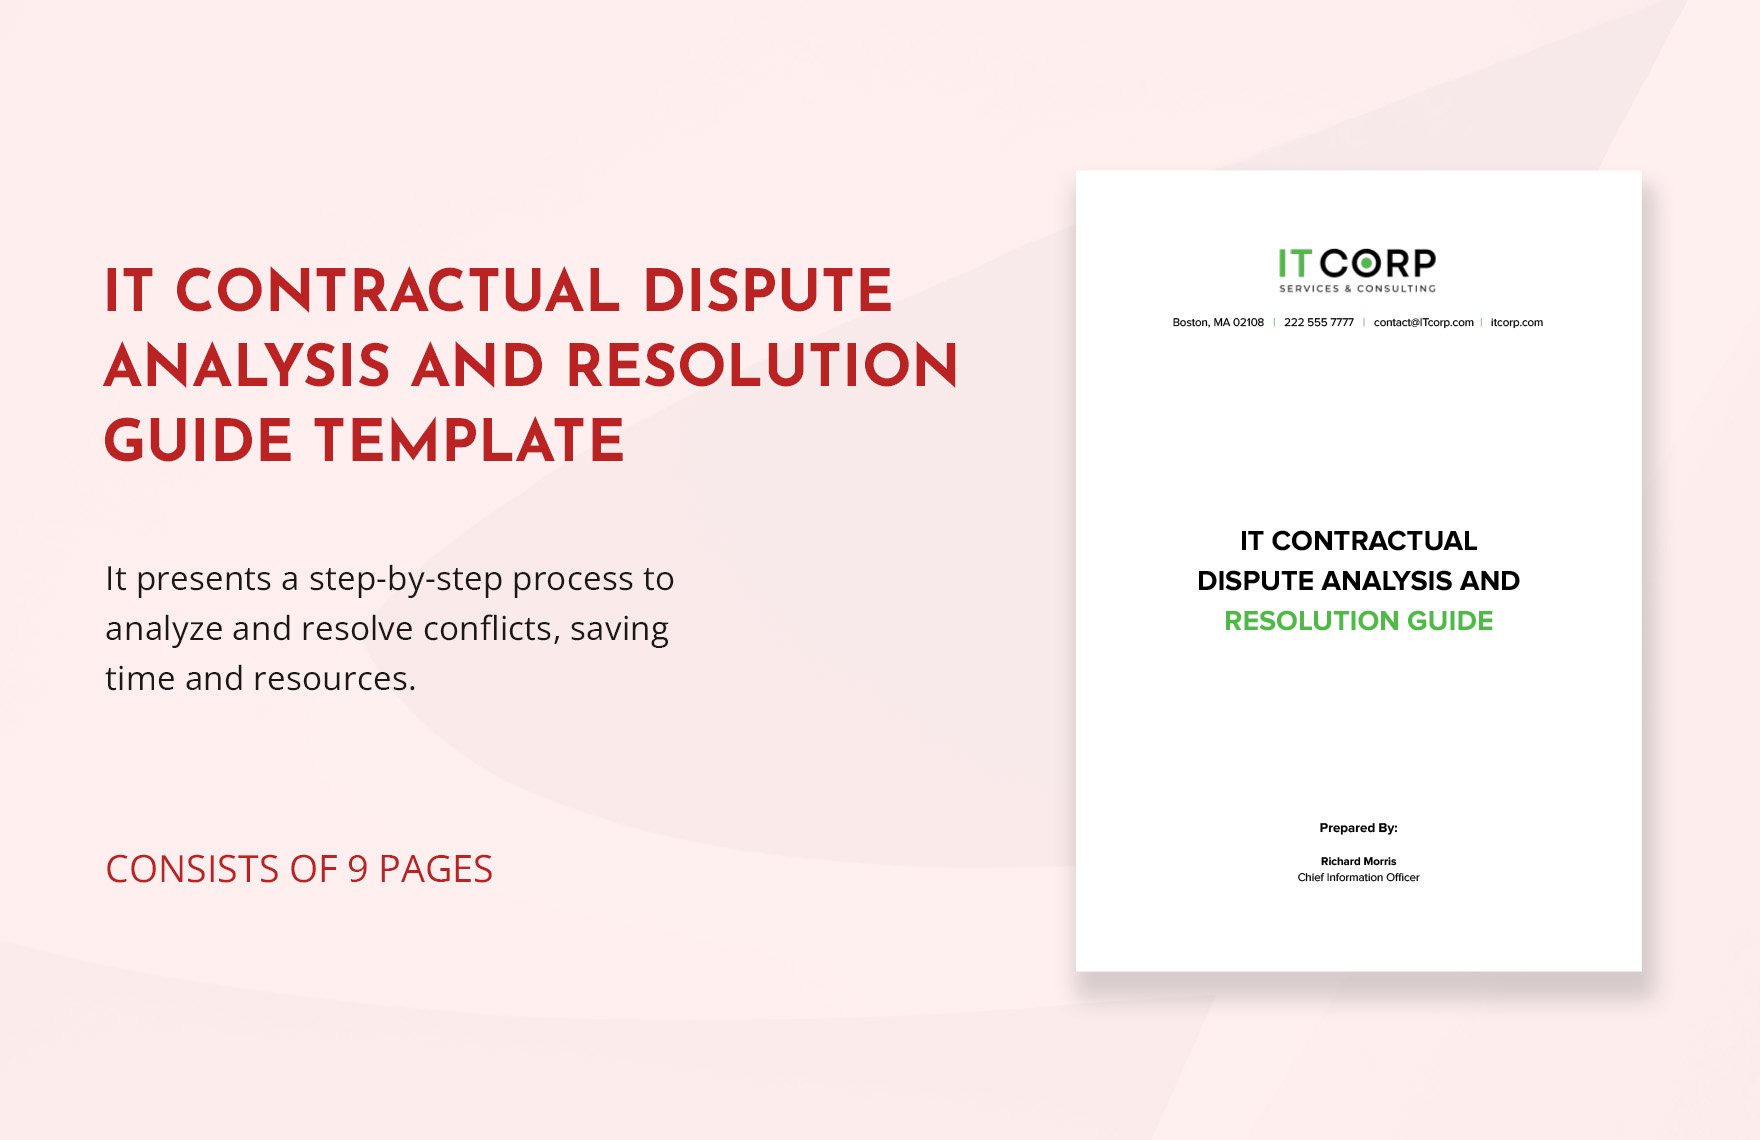 IT Contractual Dispute Analysis and Resolution Guide Template